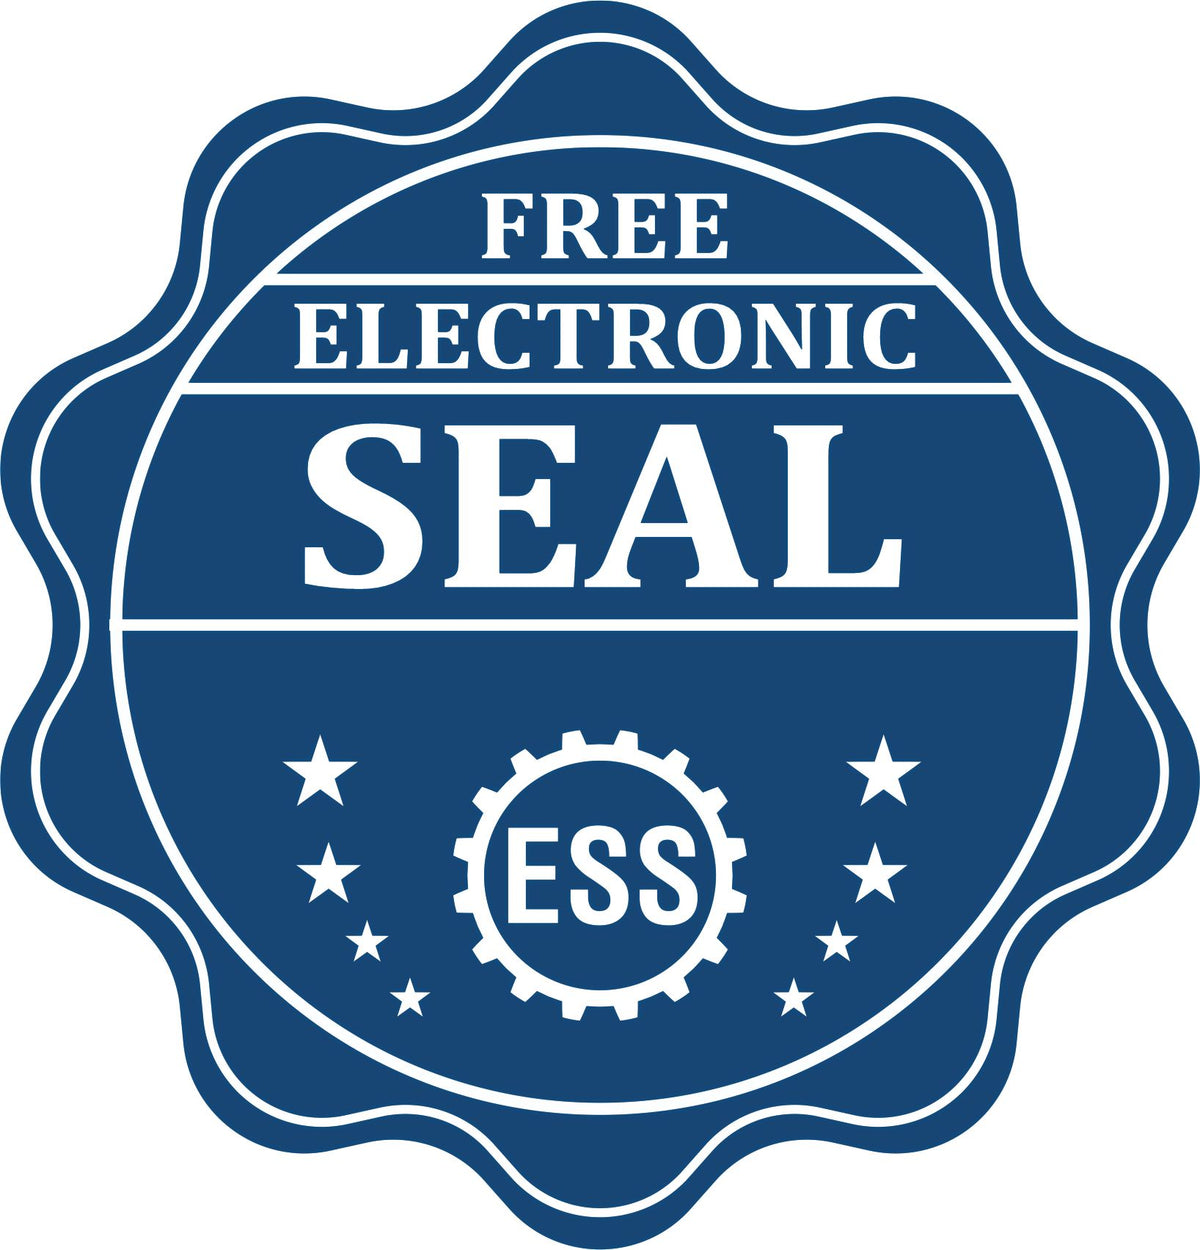 A badge showing a free electronic seal for the Premium MaxLight Pre-Inked Arkansas Geology Stamp with stars and the ESS gear on the emblem.